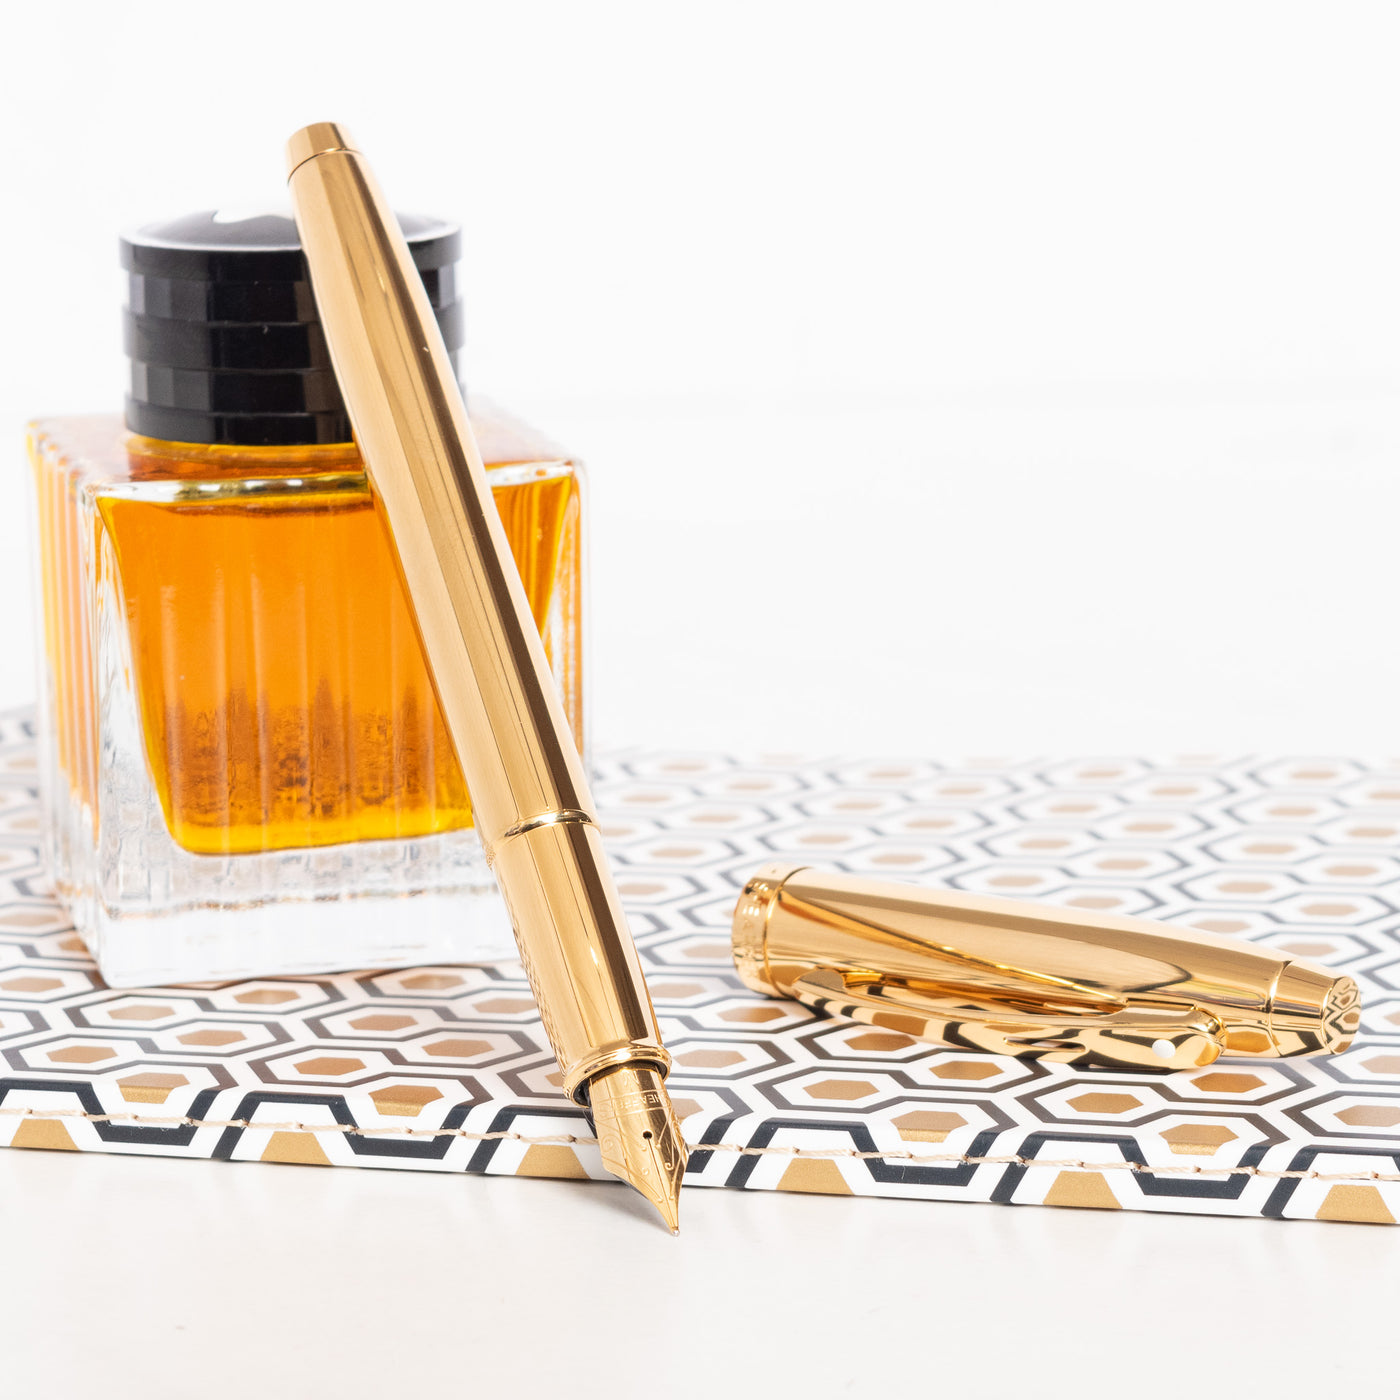 Sheaffer 100 Fountain Pen - PVD Gold with Gold Trim